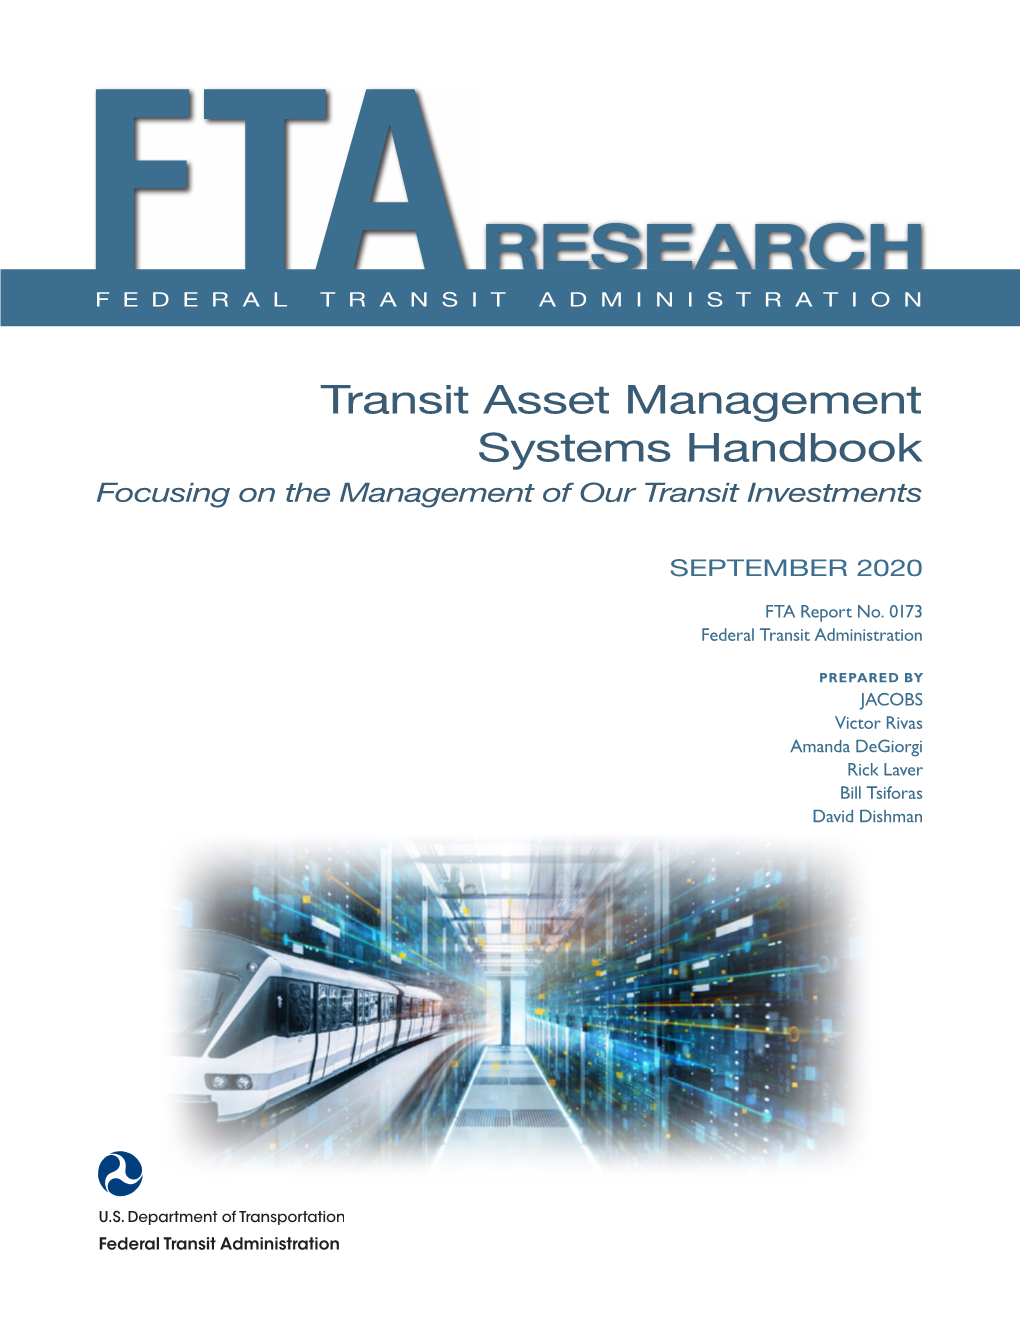 Transit Asset Management Systems Handbook Focusing on the Management of Our Transit Investments